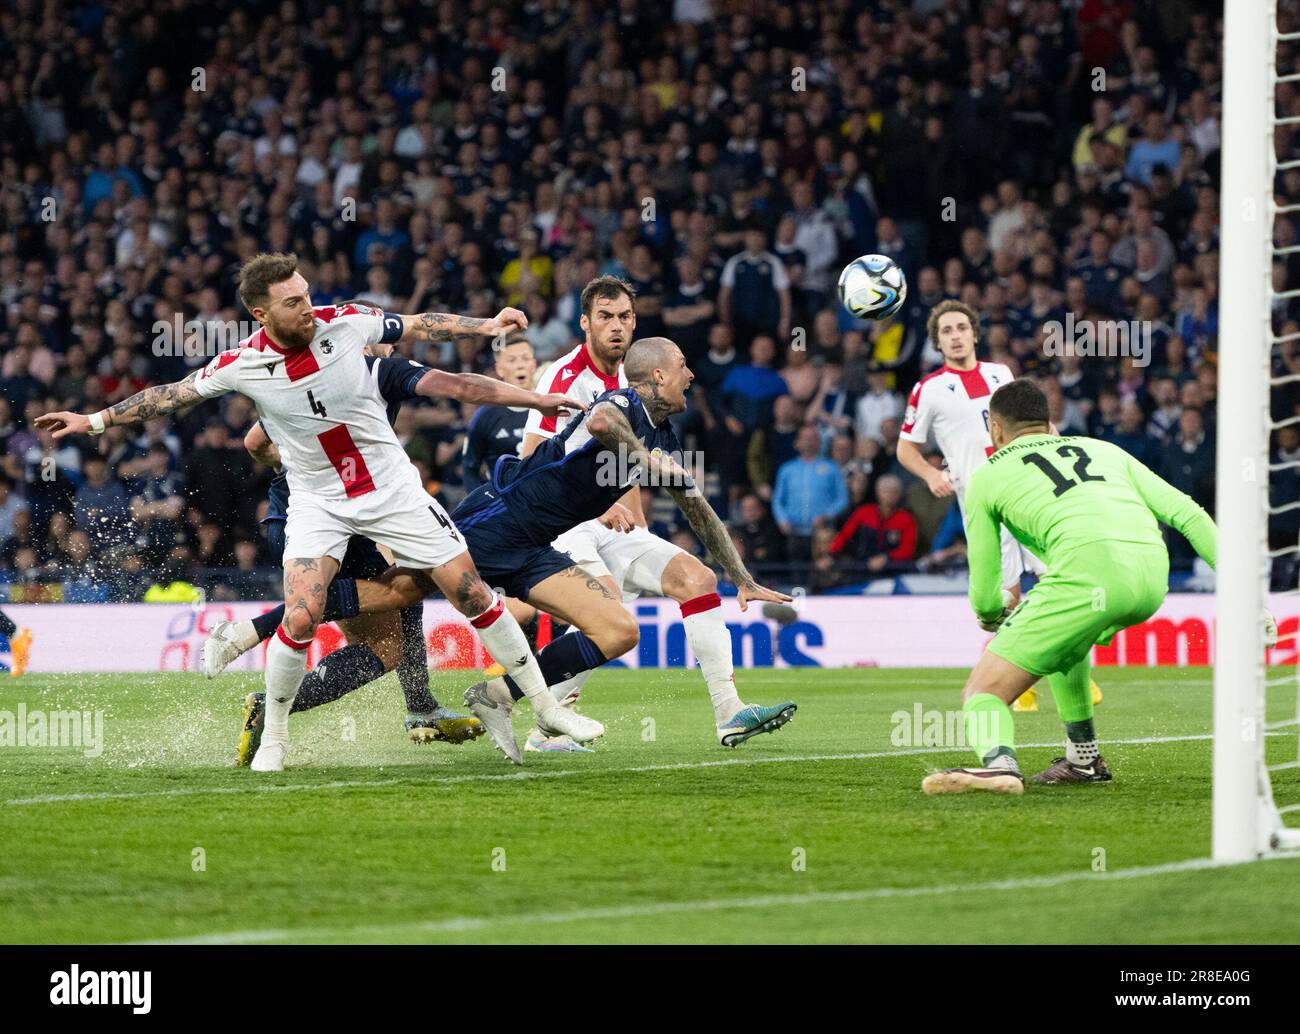 GLASGOW, SCOTLAND - JUNE 20: Scotland forward, Lyndon Dykes, comes close during the UEFA EURO 2024 qualifying round group A match between Scotland and Georgia at Hampden Park on June 20, 2023 in Glasgow, Scotland. (Photo by Ian Jacobs/MB Media/) Stock Photo